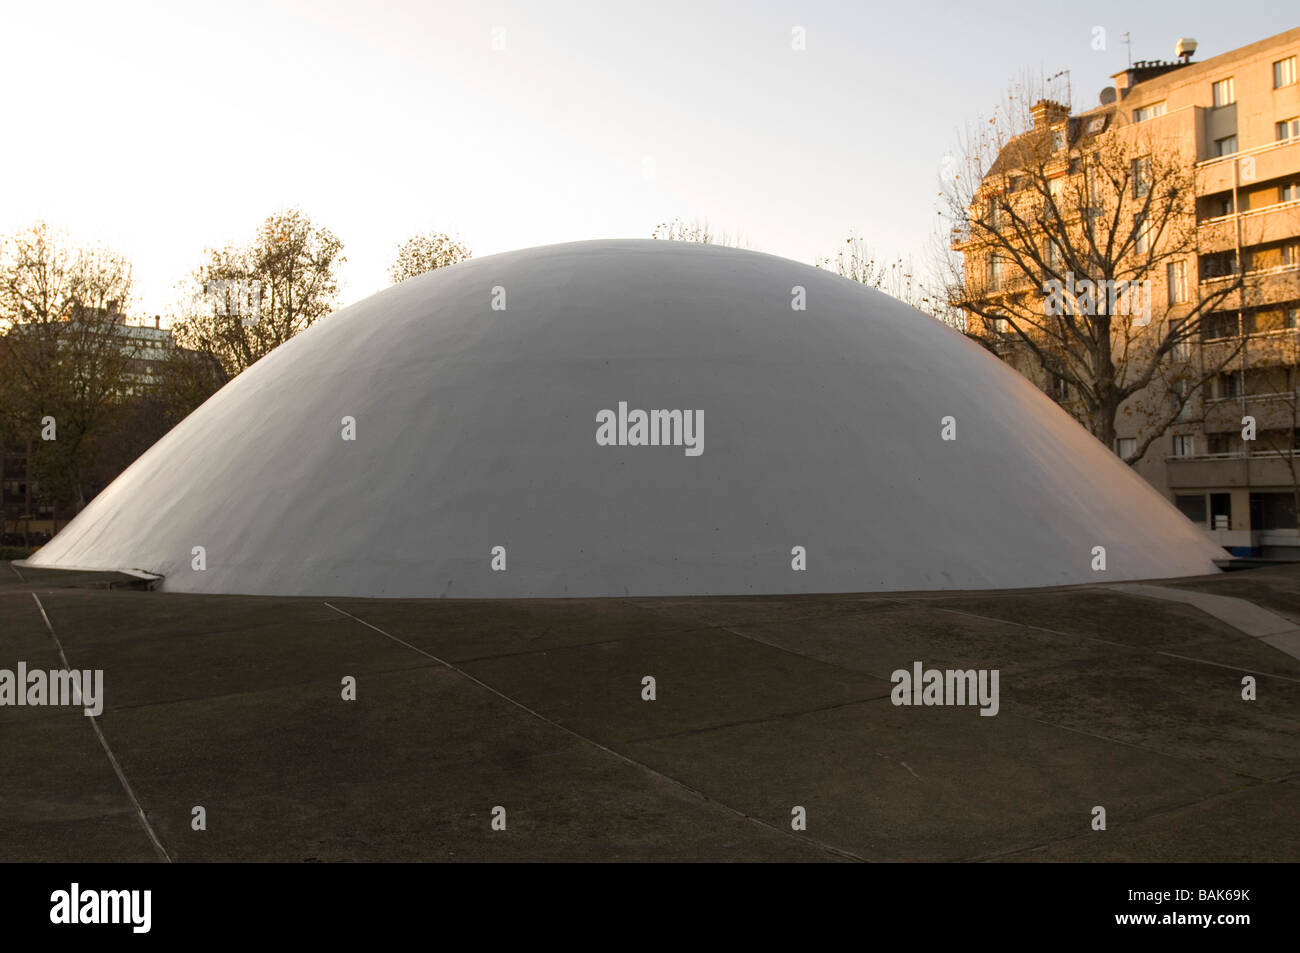 french communist party headquarters dome Stock Photo